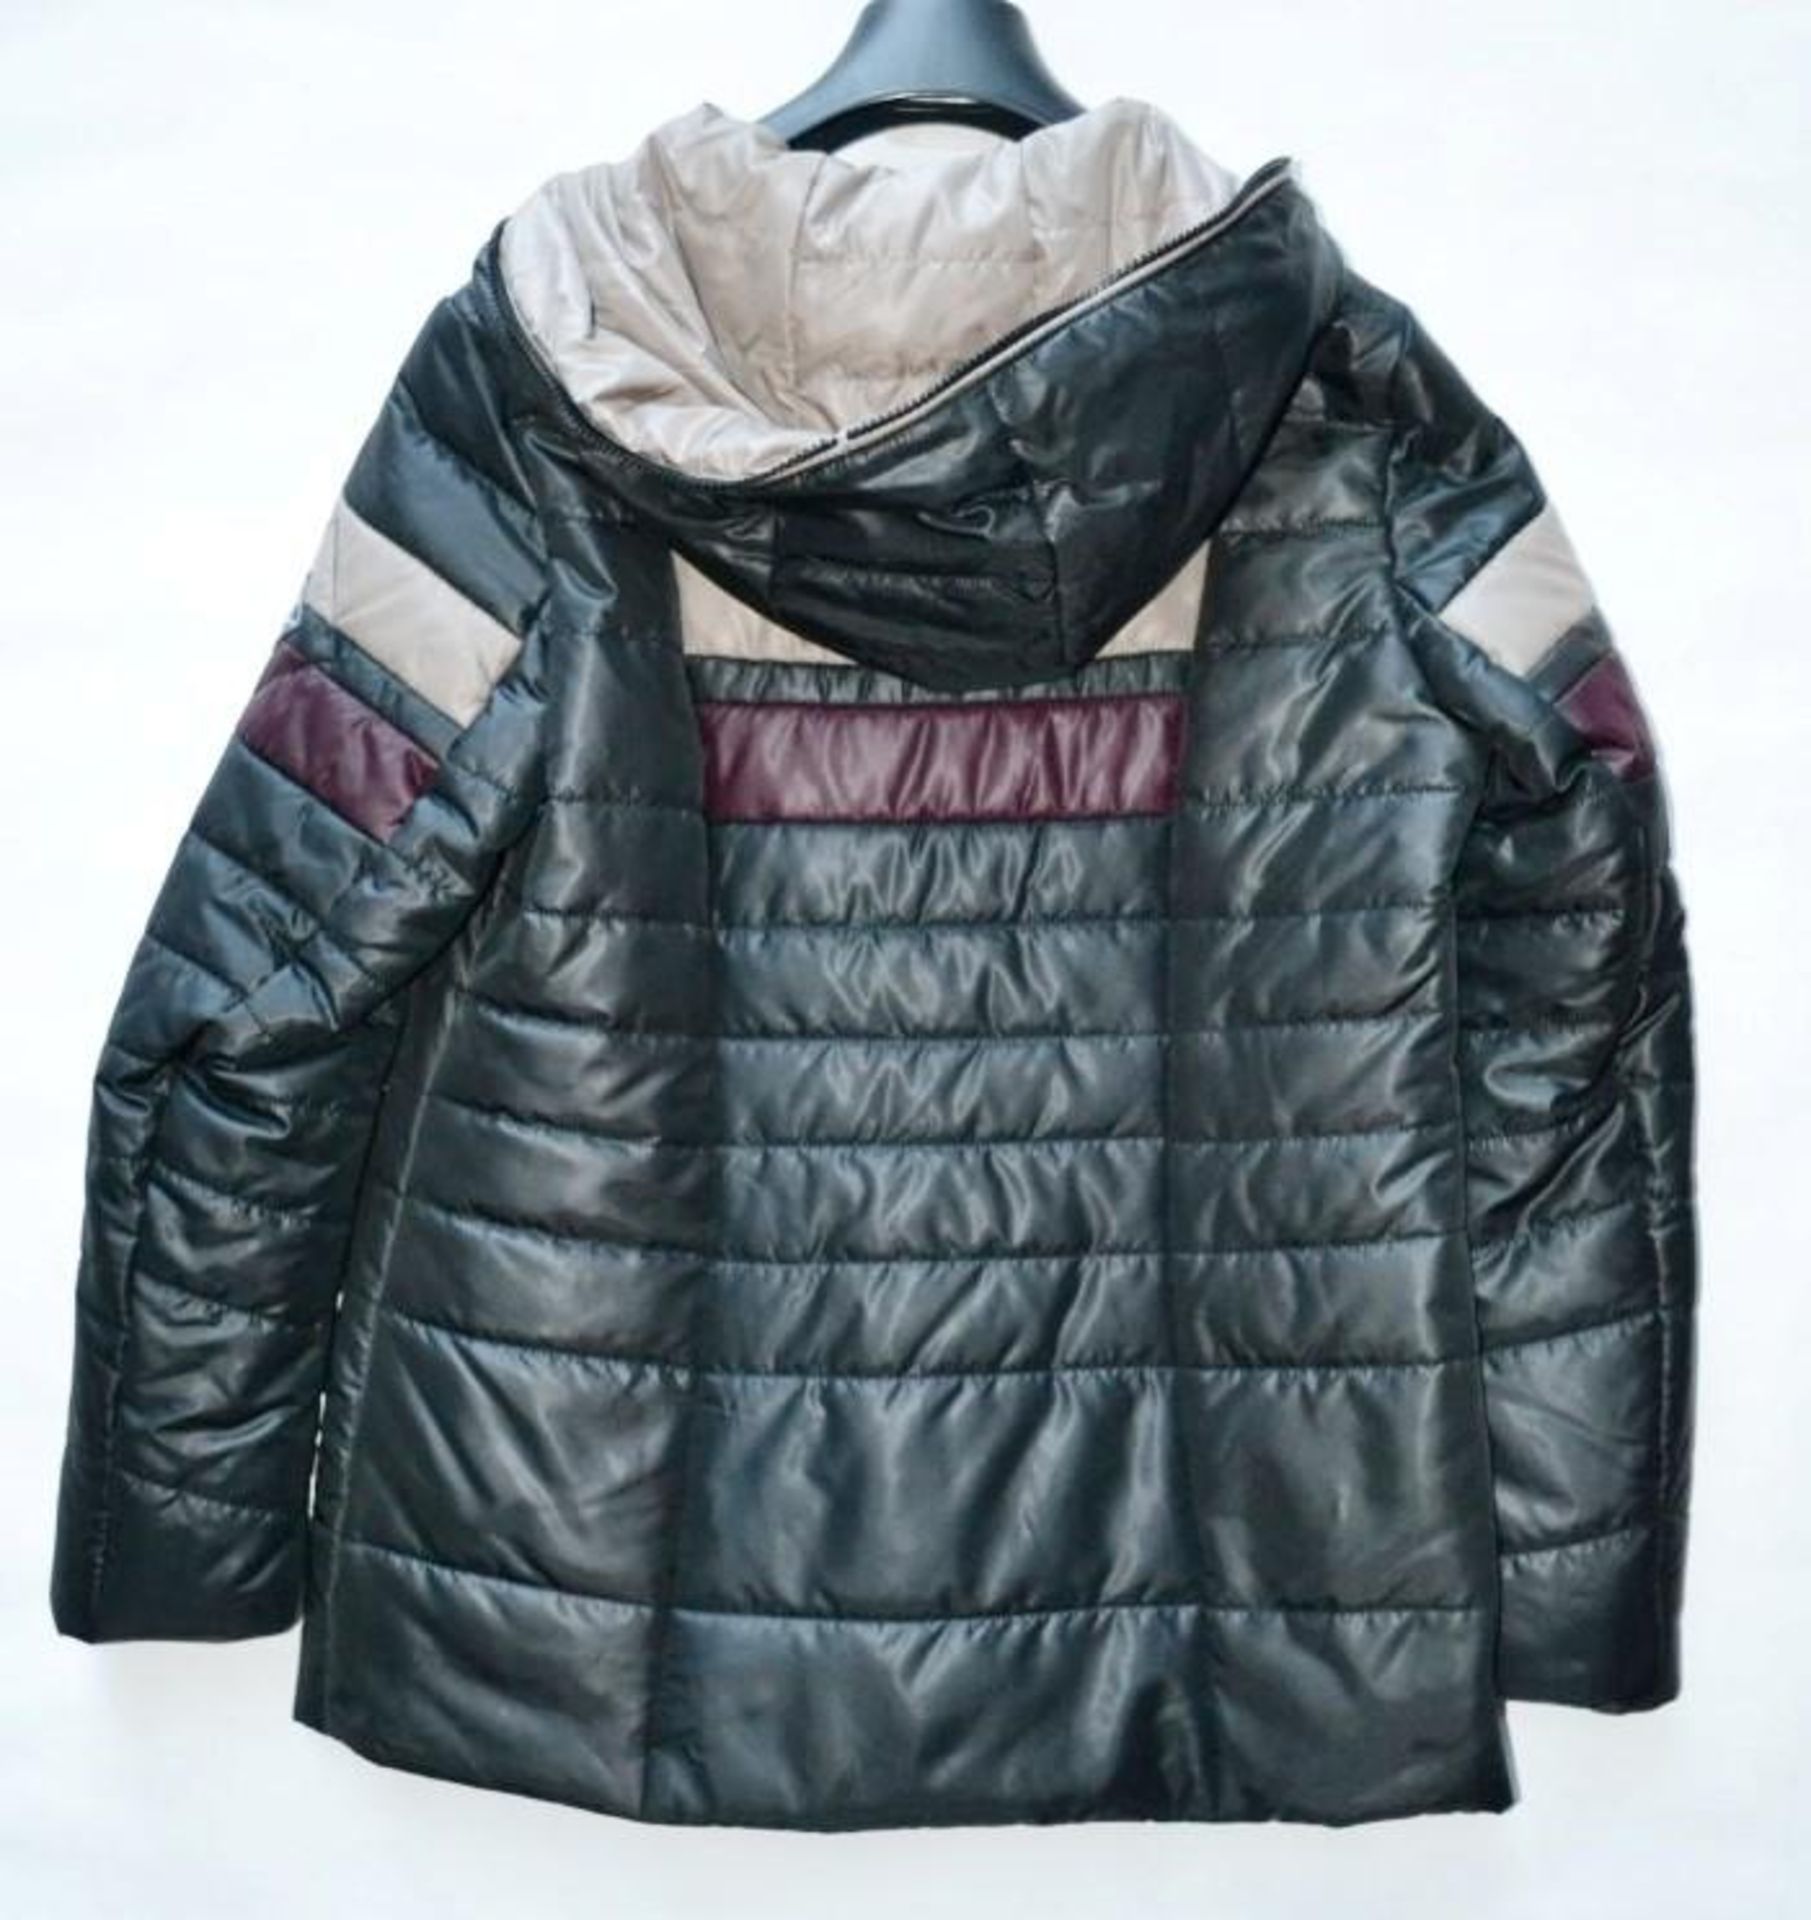 1 x Premium Branded Womens Padded Winter Coat - Features Detachable Zipped Hood - Colour: Purple / B - Image 2 of 6